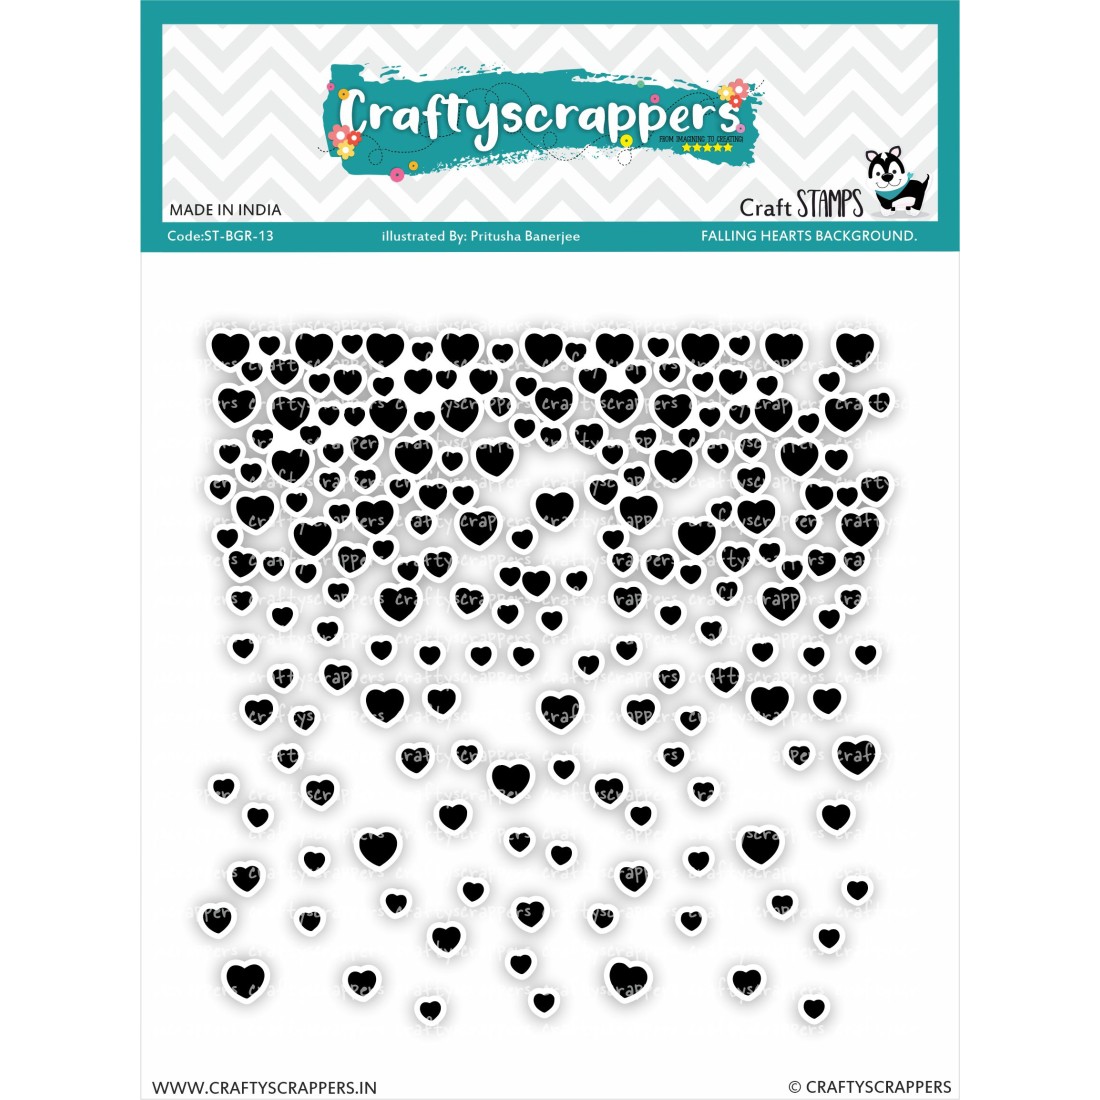 Craftyscrappers Stamps- FALLING HEARTS BACKGROUND